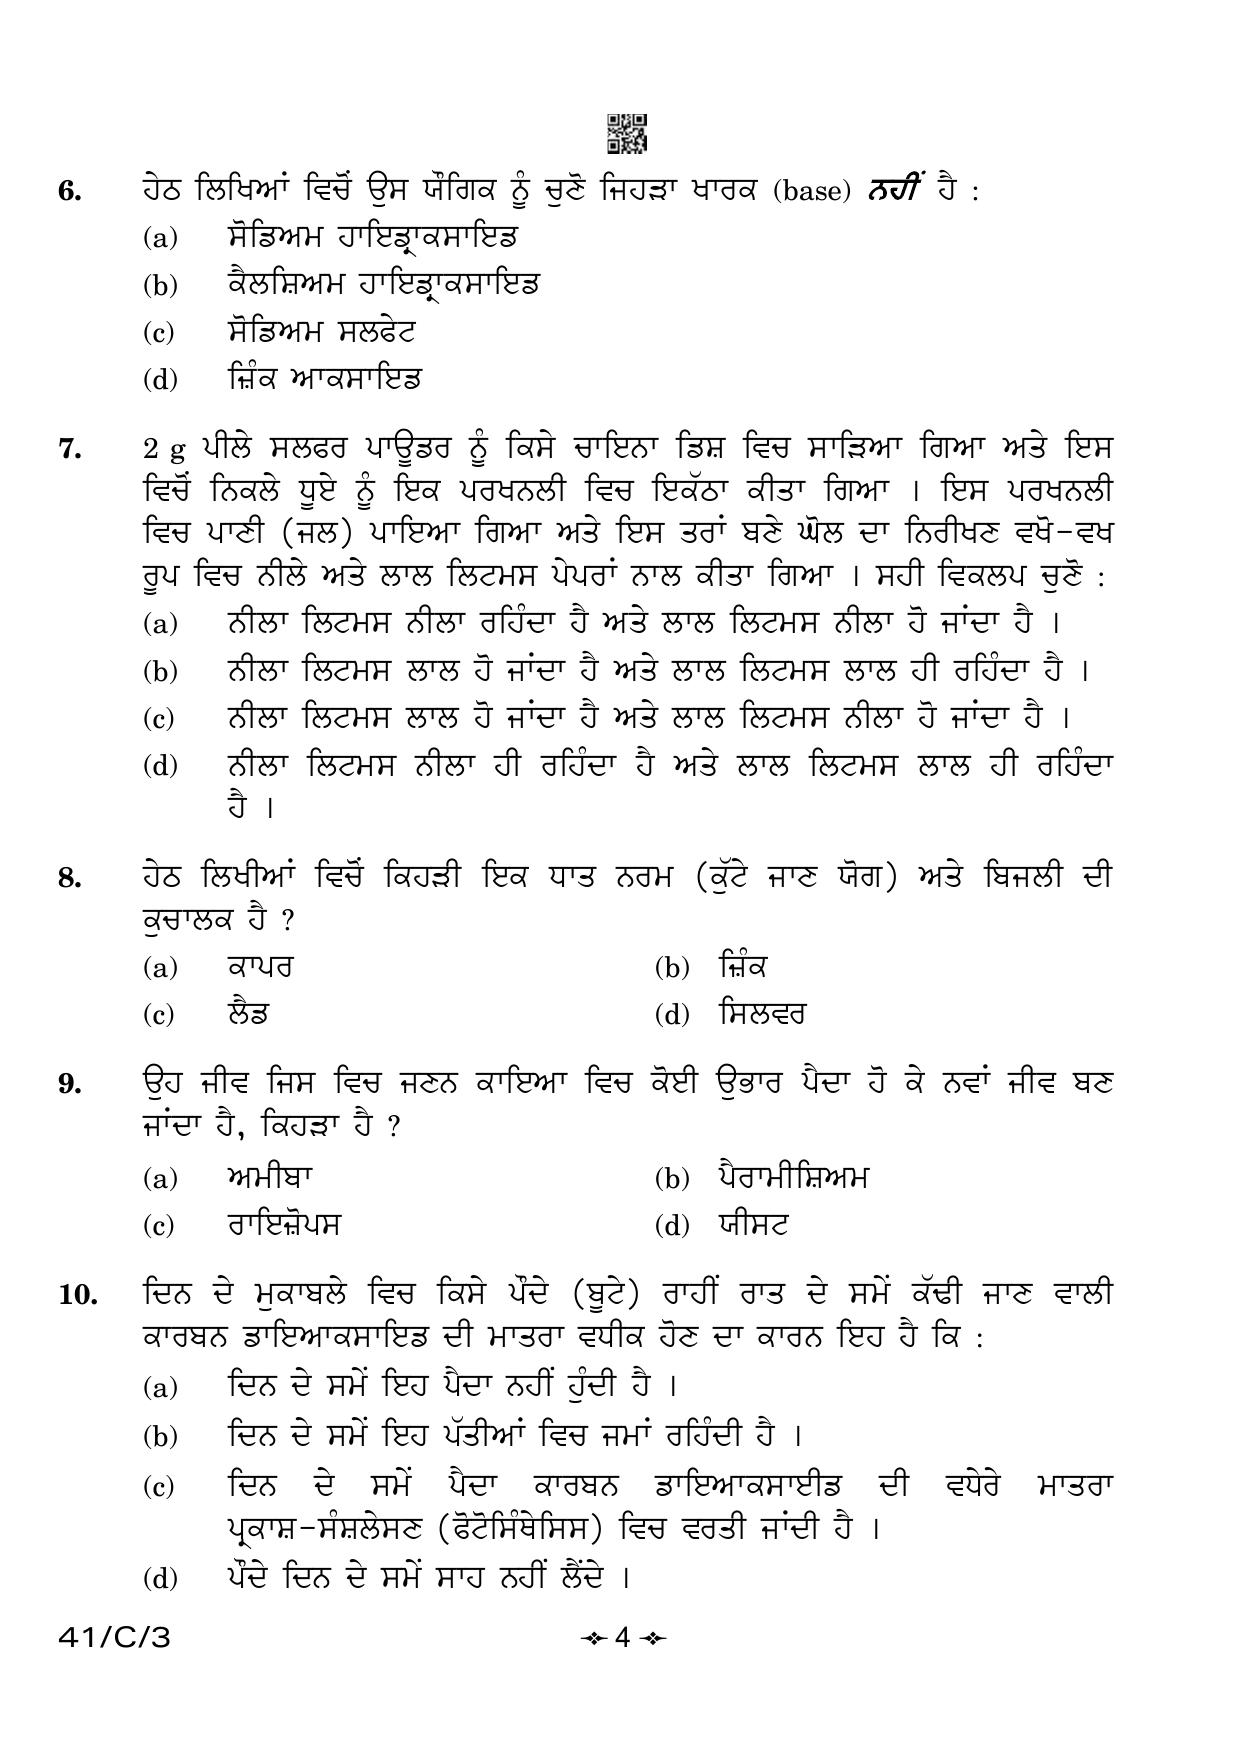 CBSE Class 10 41-3 Science Punjabi 2023 (Compartment) Question Paper - Page 4